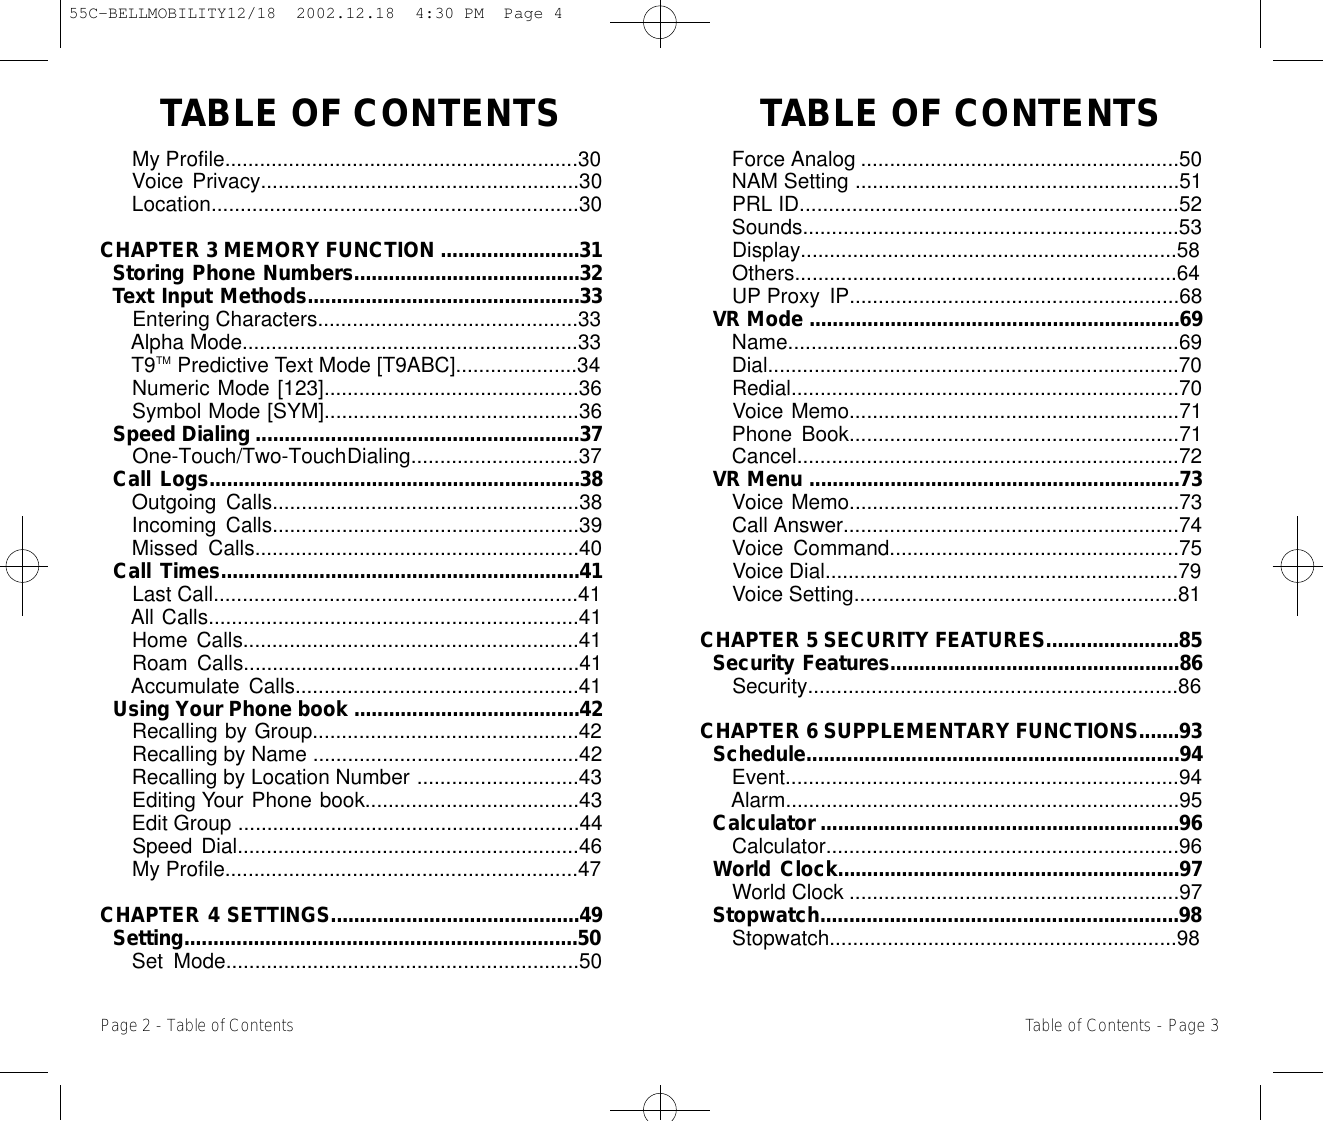 TABLE OF CONTENTS  TABLE OF CONTENTSForce Analog .......................................................50NAM Setting ........................................................51PRL ID.................................................................52Sounds.................................................................53Display.................................................................58Others..................................................................64UP Proxy IP.........................................................68VR Mode ................................................................69Name...................................................................69Dial.......................................................................70Redial...................................................................70Voice Memo.........................................................71Phone Book.........................................................71Cancel..................................................................72VR Menu ................................................................73Voice Memo.........................................................73Call Answer..........................................................74Voice Command..................................................75Voice Dial.............................................................79Voice Setting........................................................81CHAPTER 5 SECURITY FEATURES.......................85Security Features..................................................86Security................................................................86CHAPTER 6 SUPPLEMENTARY FUNCTIONS.......93Schedule................................................................94Event....................................................................94Alarm....................................................................95Calculator ..............................................................96Calculator.............................................................96World Clock...........................................................97World Clock .........................................................97Stopwatch..............................................................98Stopwatch............................................................98My Profile.............................................................30Voice Privacy.......................................................30Location...............................................................30CHAPTER 3 MEMORY FUNCTION ........................31Storing Phone Numbers.......................................32Text Input Methods...............................................33Entering Characters.............................................33Alpha Mode..........................................................33T9TM Predictive Text Mode [T9ABC].....................34Numeric Mode [123]............................................36Symbol Mode [SYM]............................................36Speed Dialing ........................................................37One-Touch/Two-Touch Dialing.............................37Call Logs................................................................38Outgoing Calls.....................................................38Incoming Calls.....................................................39Missed Calls........................................................40Call Times..............................................................41Last Call...............................................................41All Calls................................................................41Home Calls..........................................................41Roam Calls..........................................................41Accumulate Calls.................................................41Using Your Phone book .......................................42Recalling by Group..............................................42Recalling by Name ..............................................42Recalling by Location Number ............................43Editing Your Phone book.....................................43Edit Group ...........................................................44Speed Dial...........................................................46My Profile.............................................................47CHAPTER 4 SETTINGS...........................................49Setting....................................................................50Set Mode.............................................................50Page 2 - Table of Contents Table of Contents - Page 355C-BELLMOBILITY12/18  2002.12.18  4:30 PM  Page 4